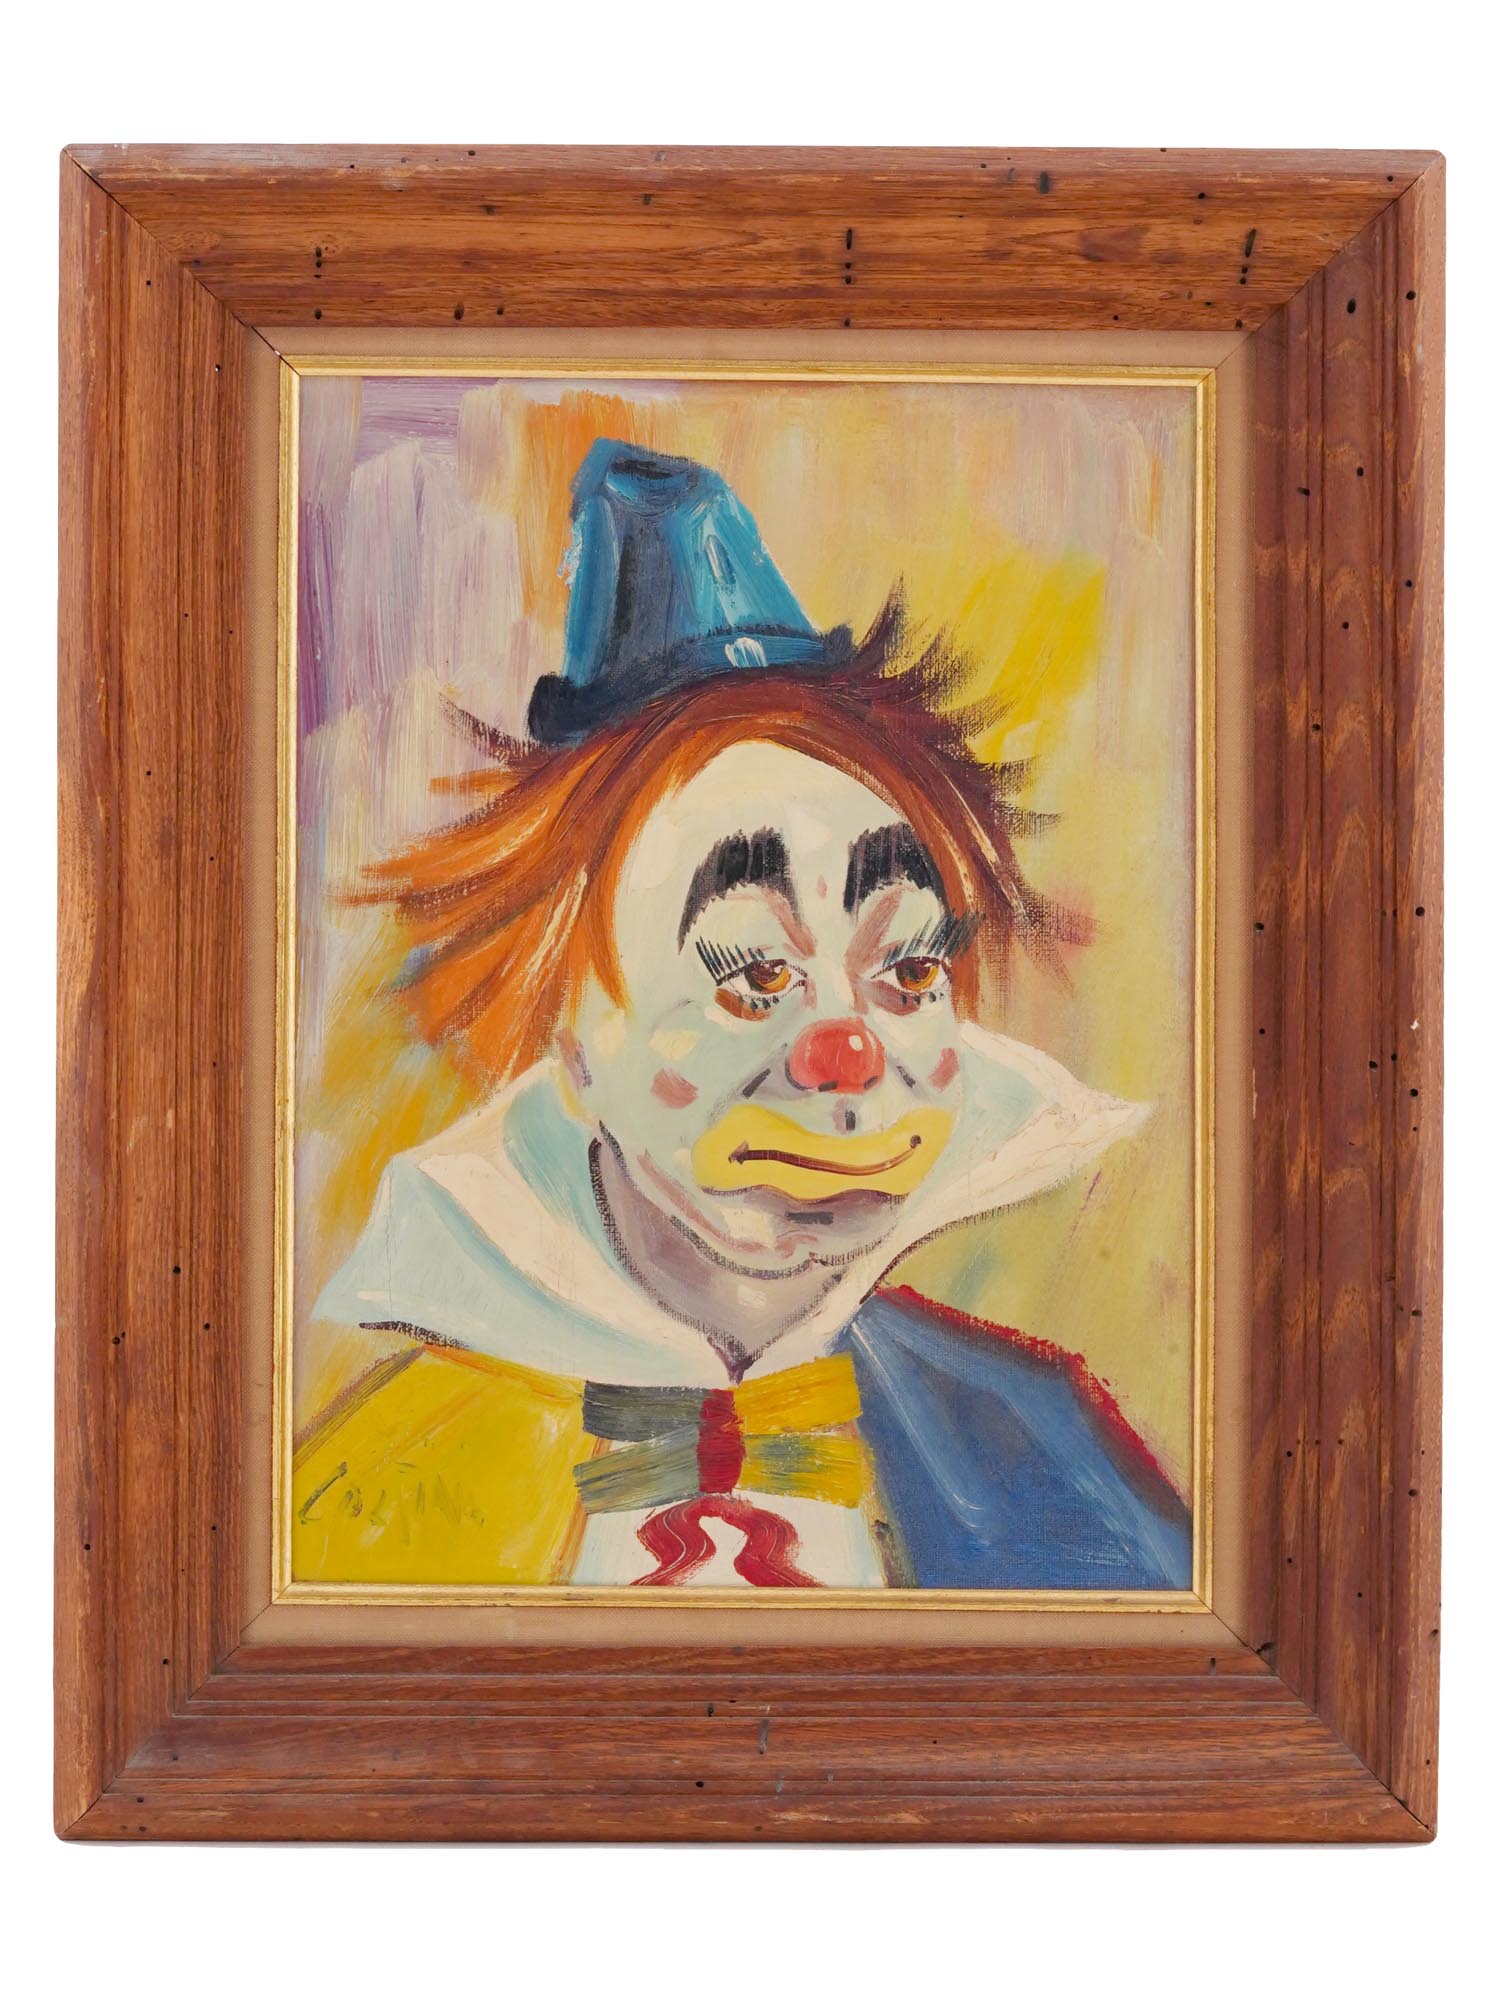 MIDCENT OIL PAINTING PORTRAIT OF CLOWN BY COLLIN PIC-0